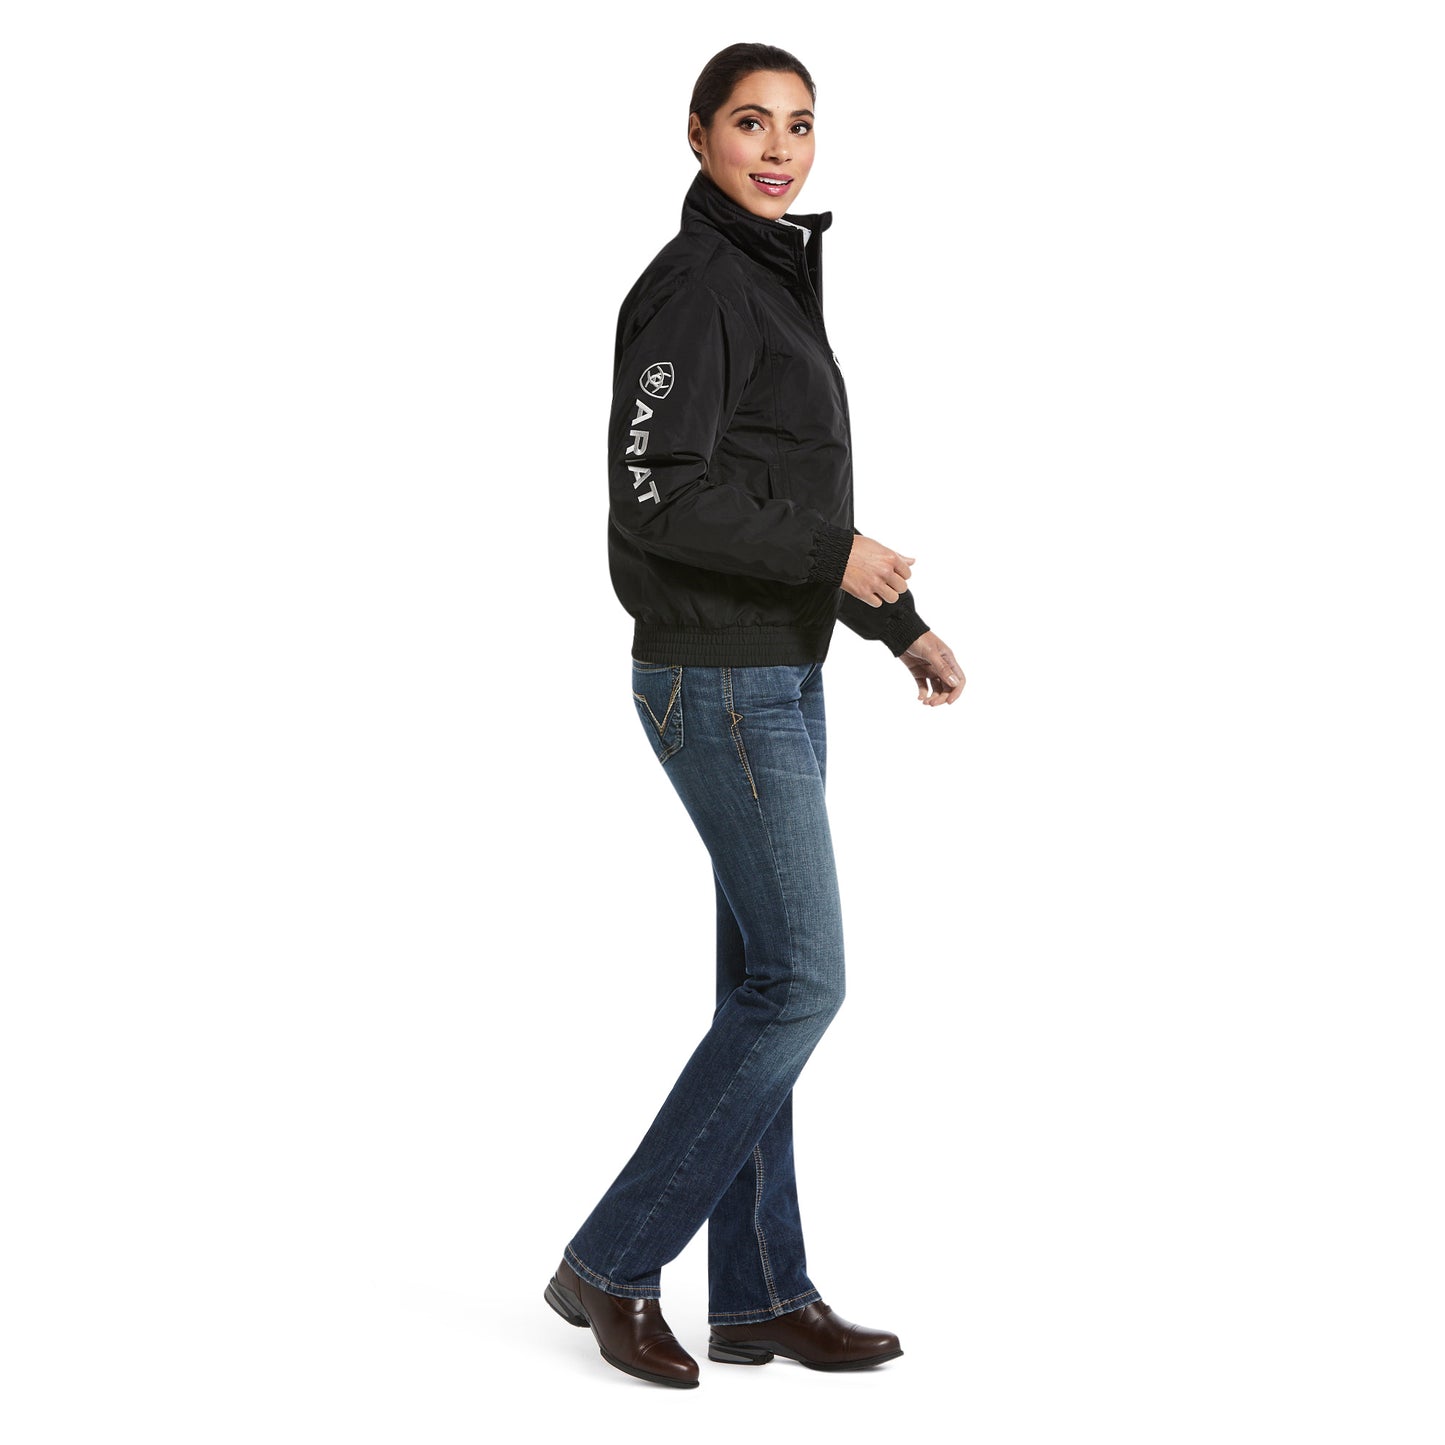 Ariat Women's Stable Insulated Jacket Black